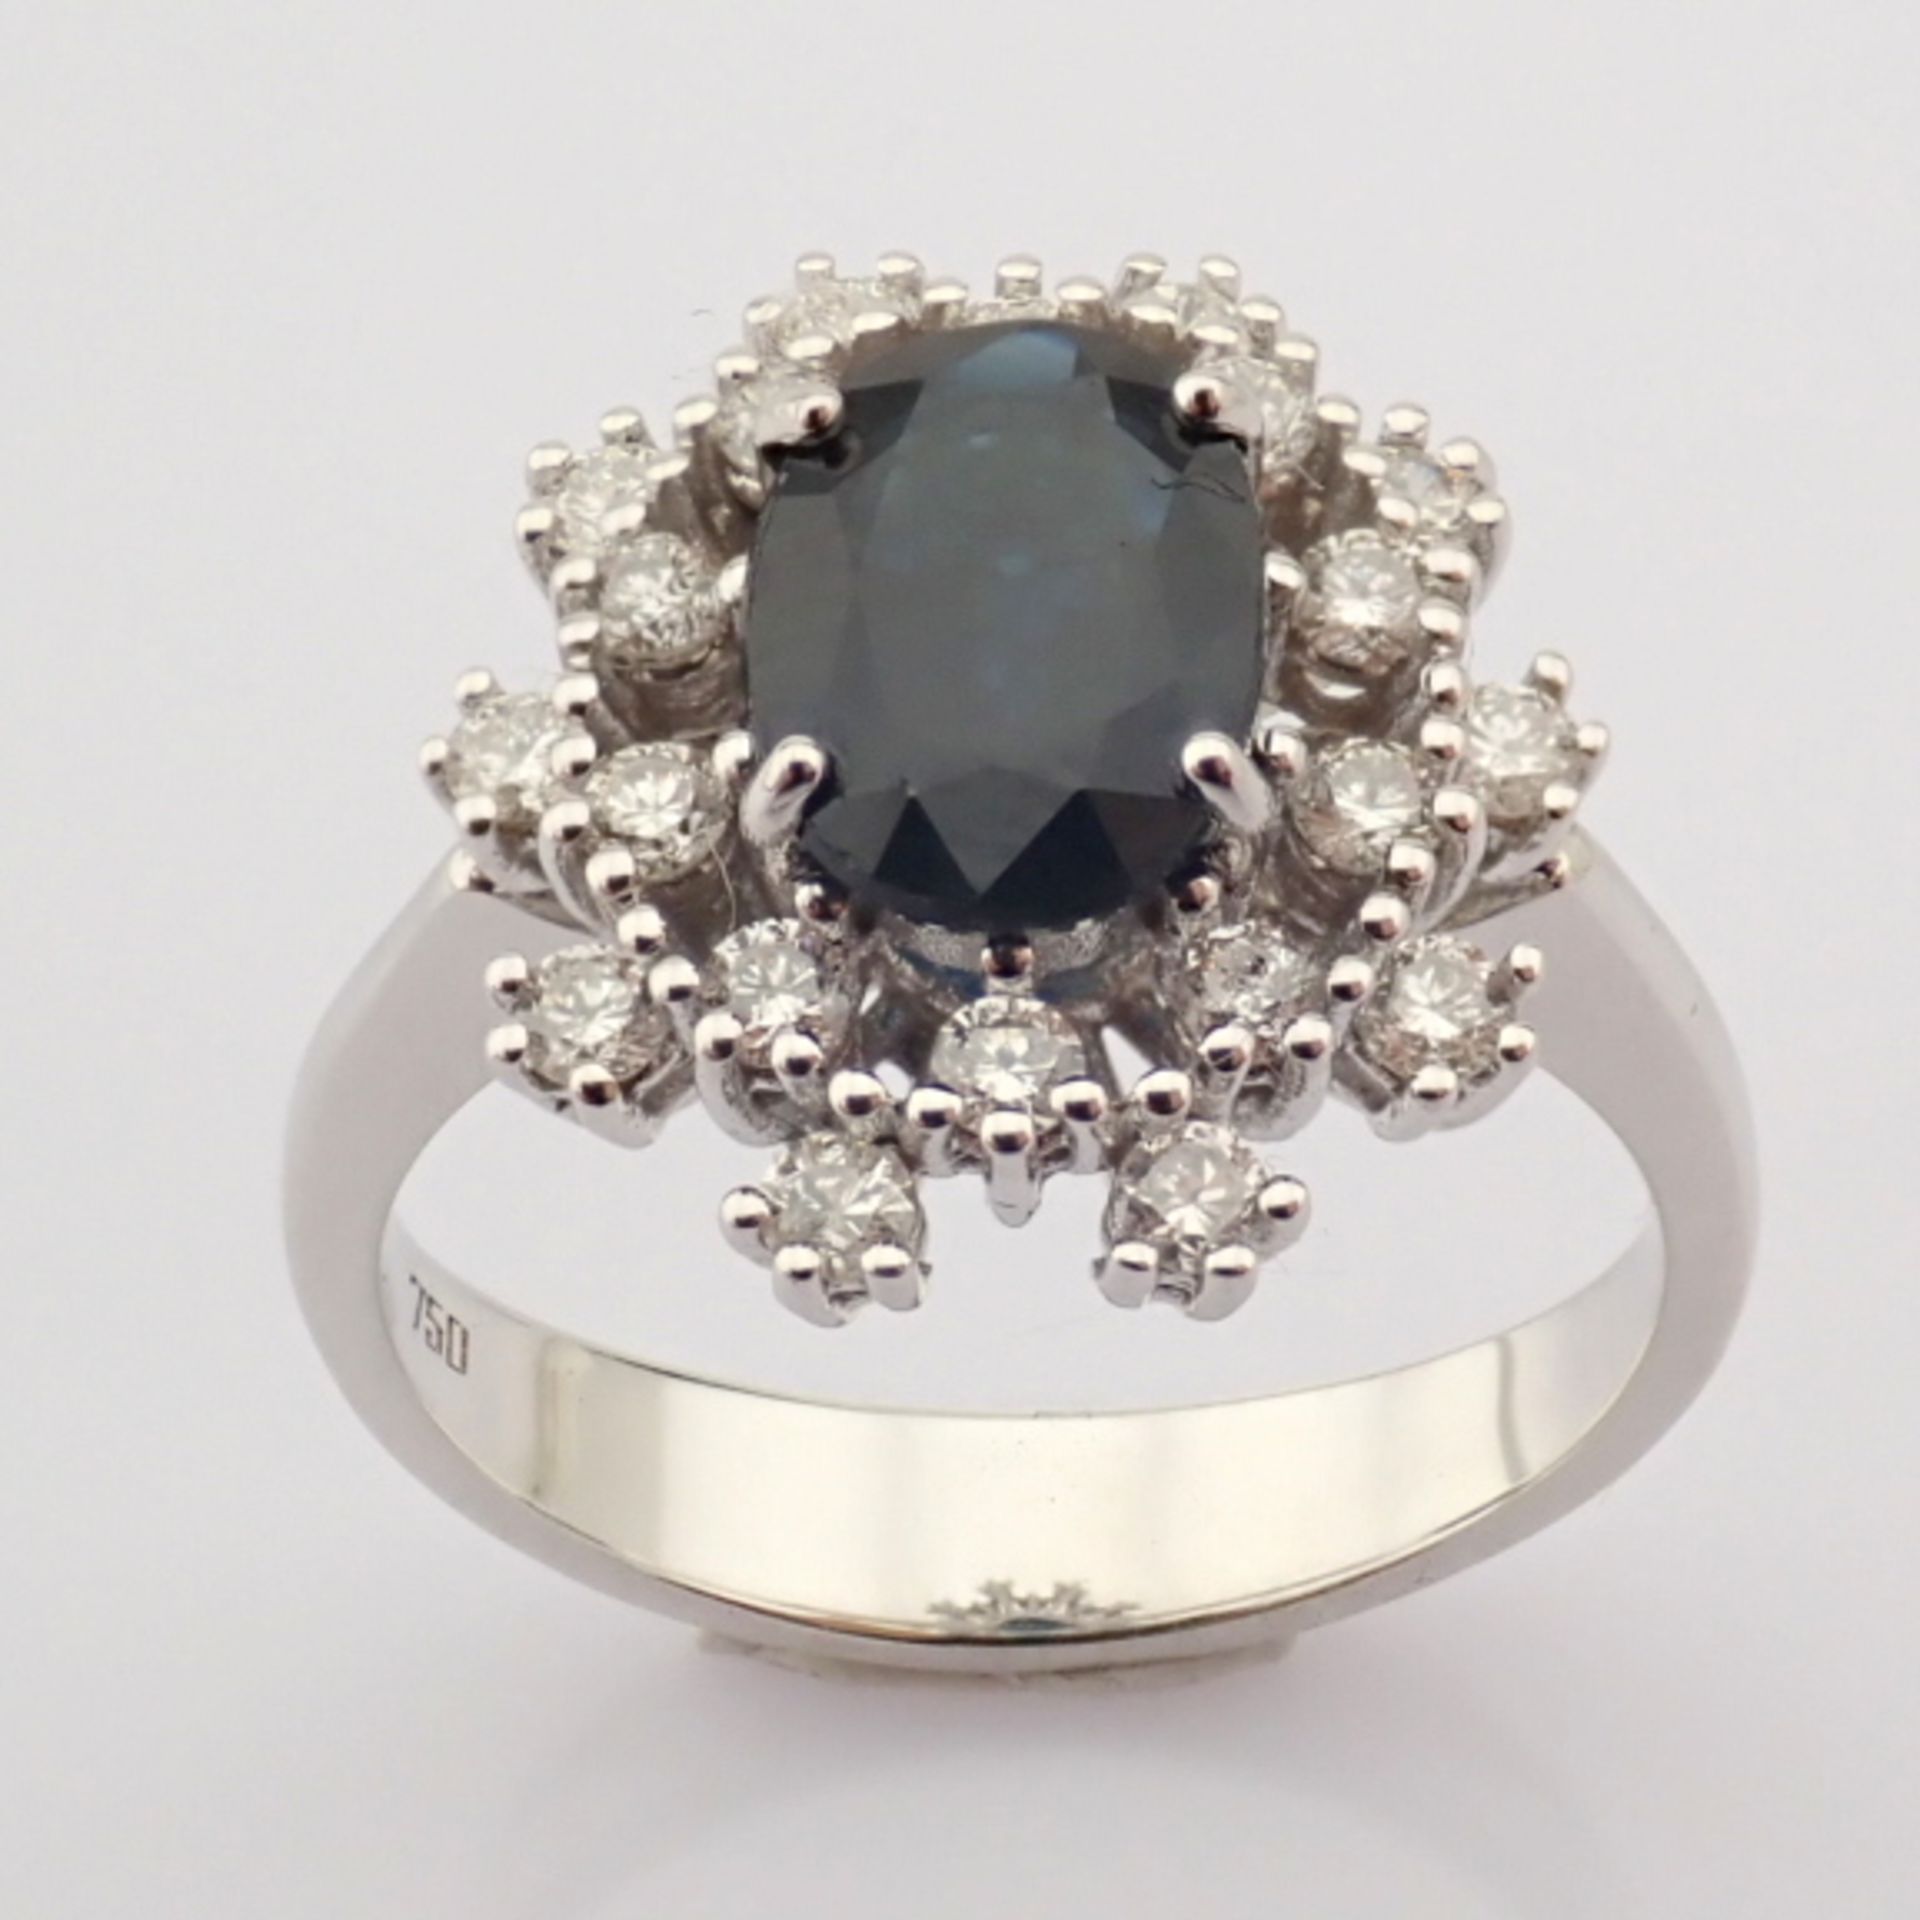 Certificated 18K White Gold Diamond & Sapphire Ring - Image 2 of 6